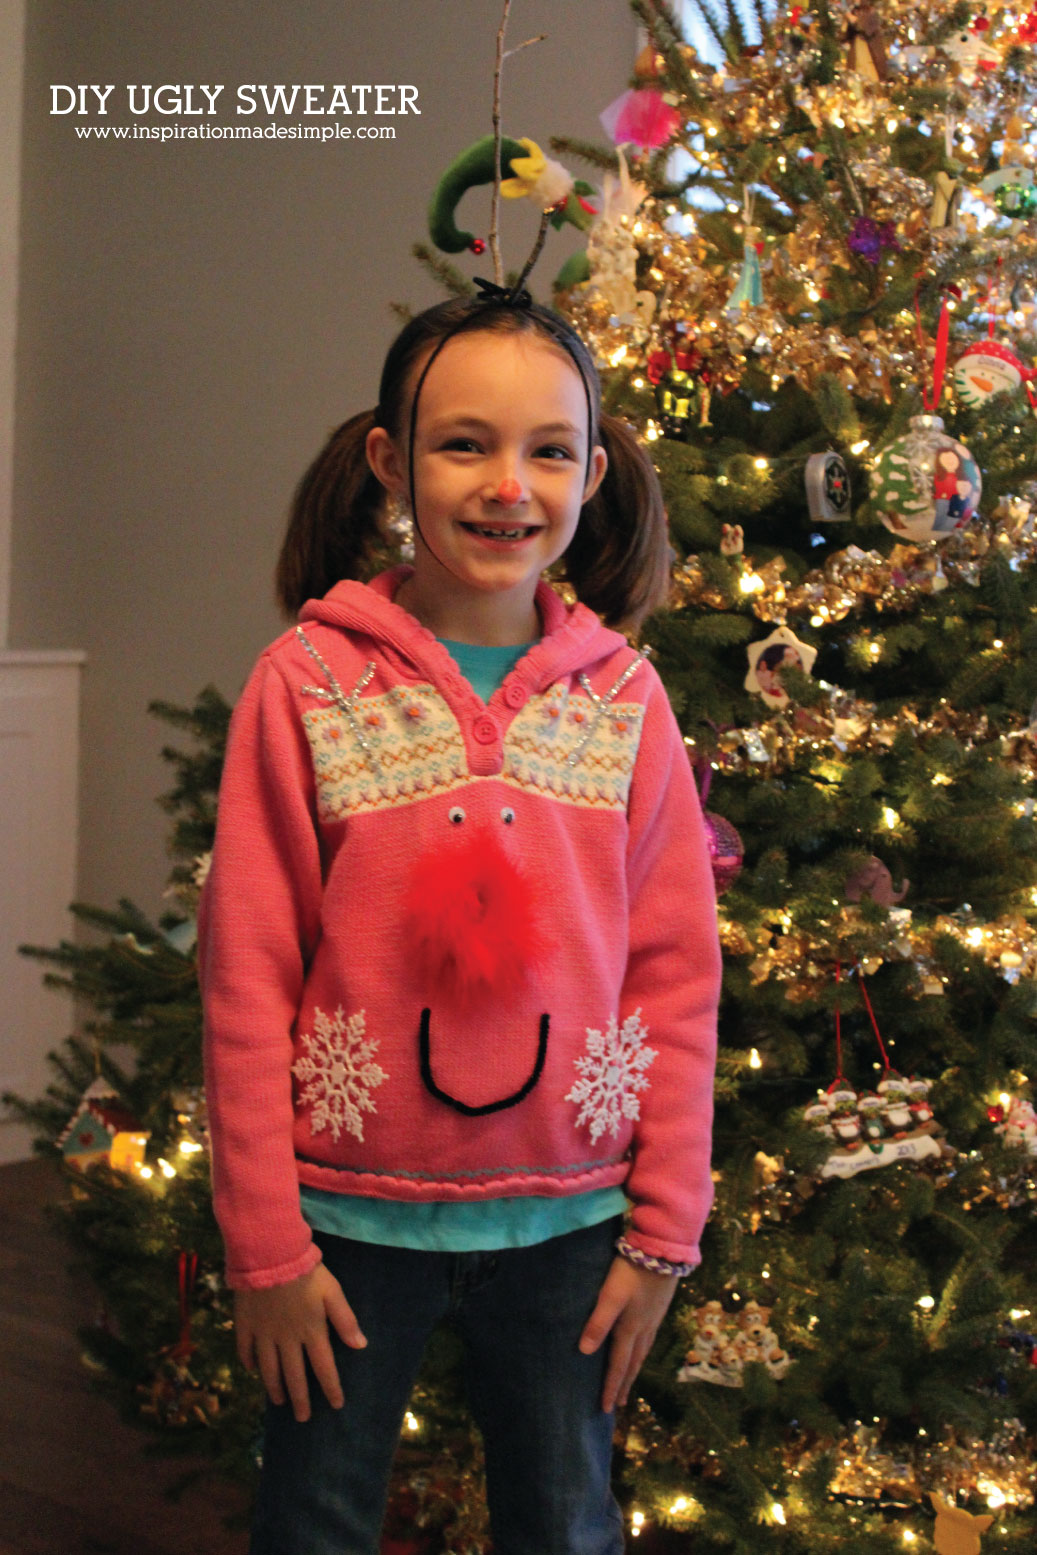 DIY Ugly Sweater and Crazy Holiday Hair